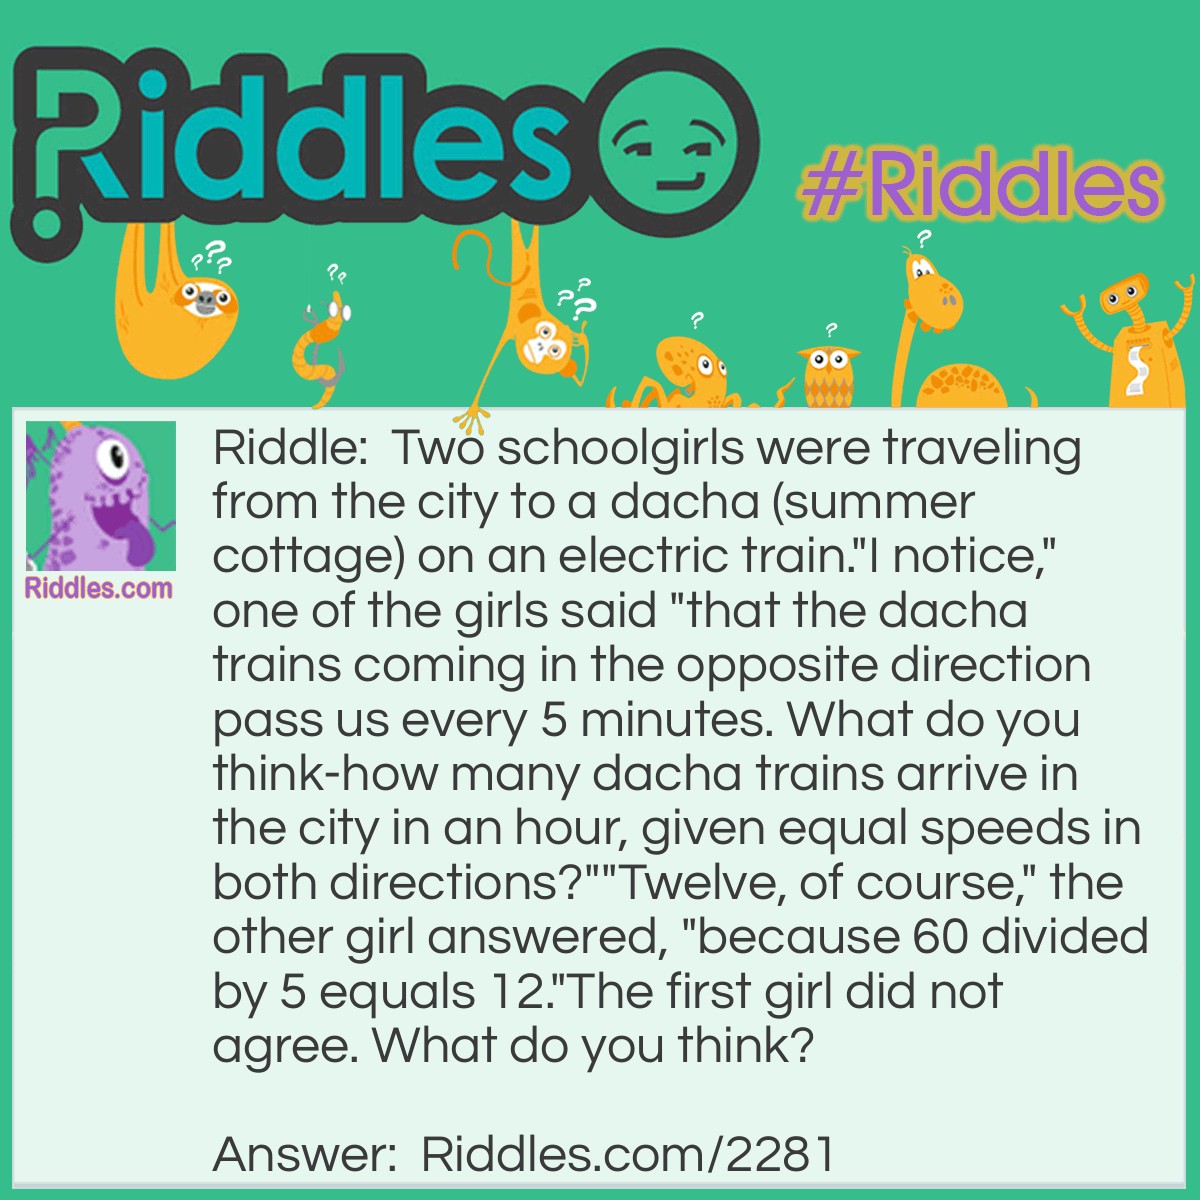 Riddle: Two schoolgirls were traveling from the city to a dacha (summer cottage) on an electric train.
"I notice," one of the girls said "that the dacha trains coming in the opposite direction pass us every 5 minutes. What do you think-how many dacha trains arrive in the city in an hour, given equal speeds in both directions?"
"Twelve, of course," the other girl answered, "because 60 divided by 5 equals 12."
The first girl did not agree. What do you think? Answer: If the girls had been on a standing train, the first girl's calculations would have been correct, but their train was moving. It took 5 minutes to meet a second train, but then it took the second train 5 more minutes to reach where the girls met the first train. So the time between trains is 10 minutes, not 5, and only 6 trains per hour arrive in the city.